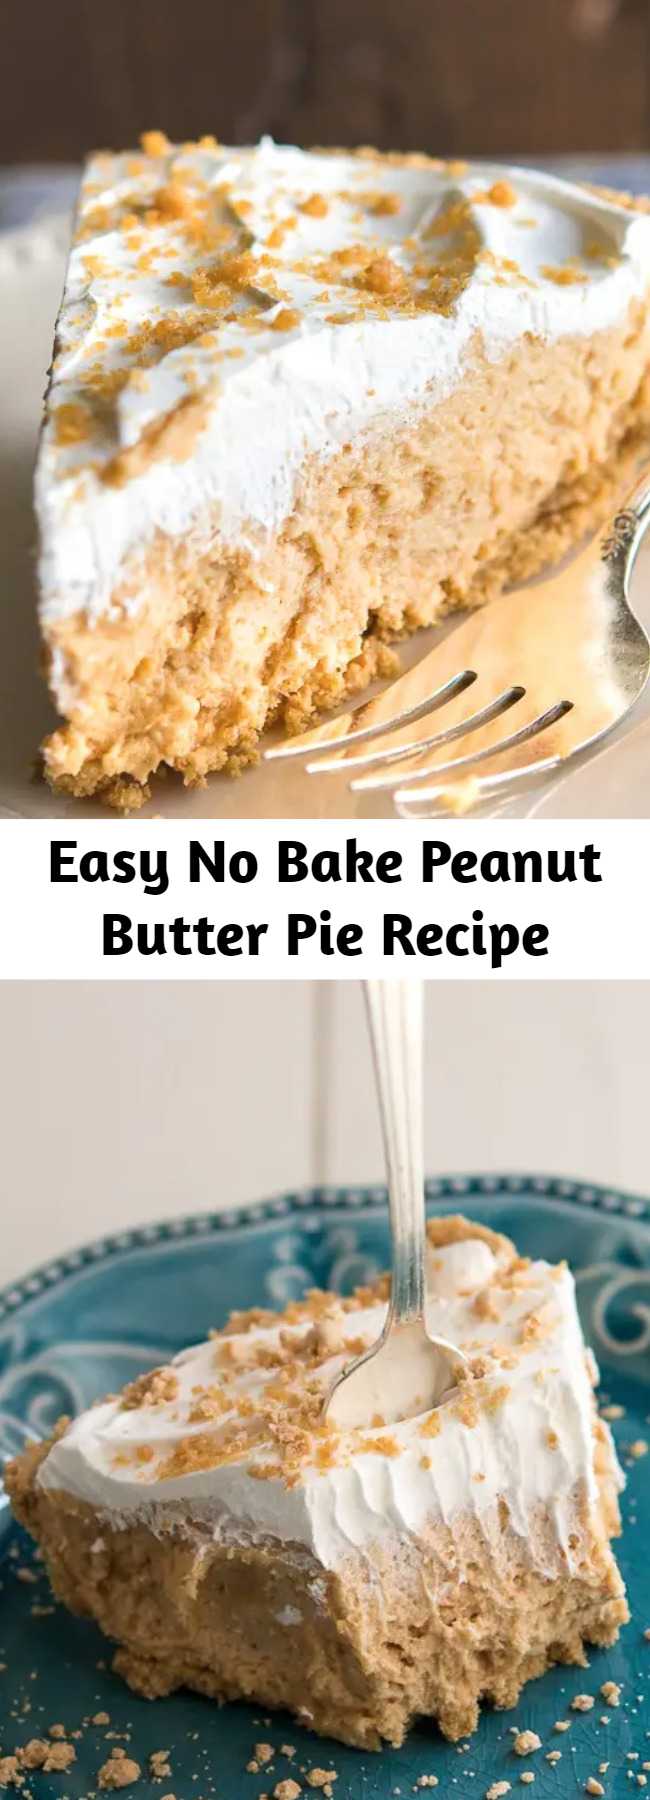 Easy No Bake Peanut Butter Pie Recipe - Our simple no bake peanut butter pie recipe is a sweet, creamy, delicious and quick treat. It's perfect for holidays, special occasions or any time! #peanutbutter #pie #amish #nobake